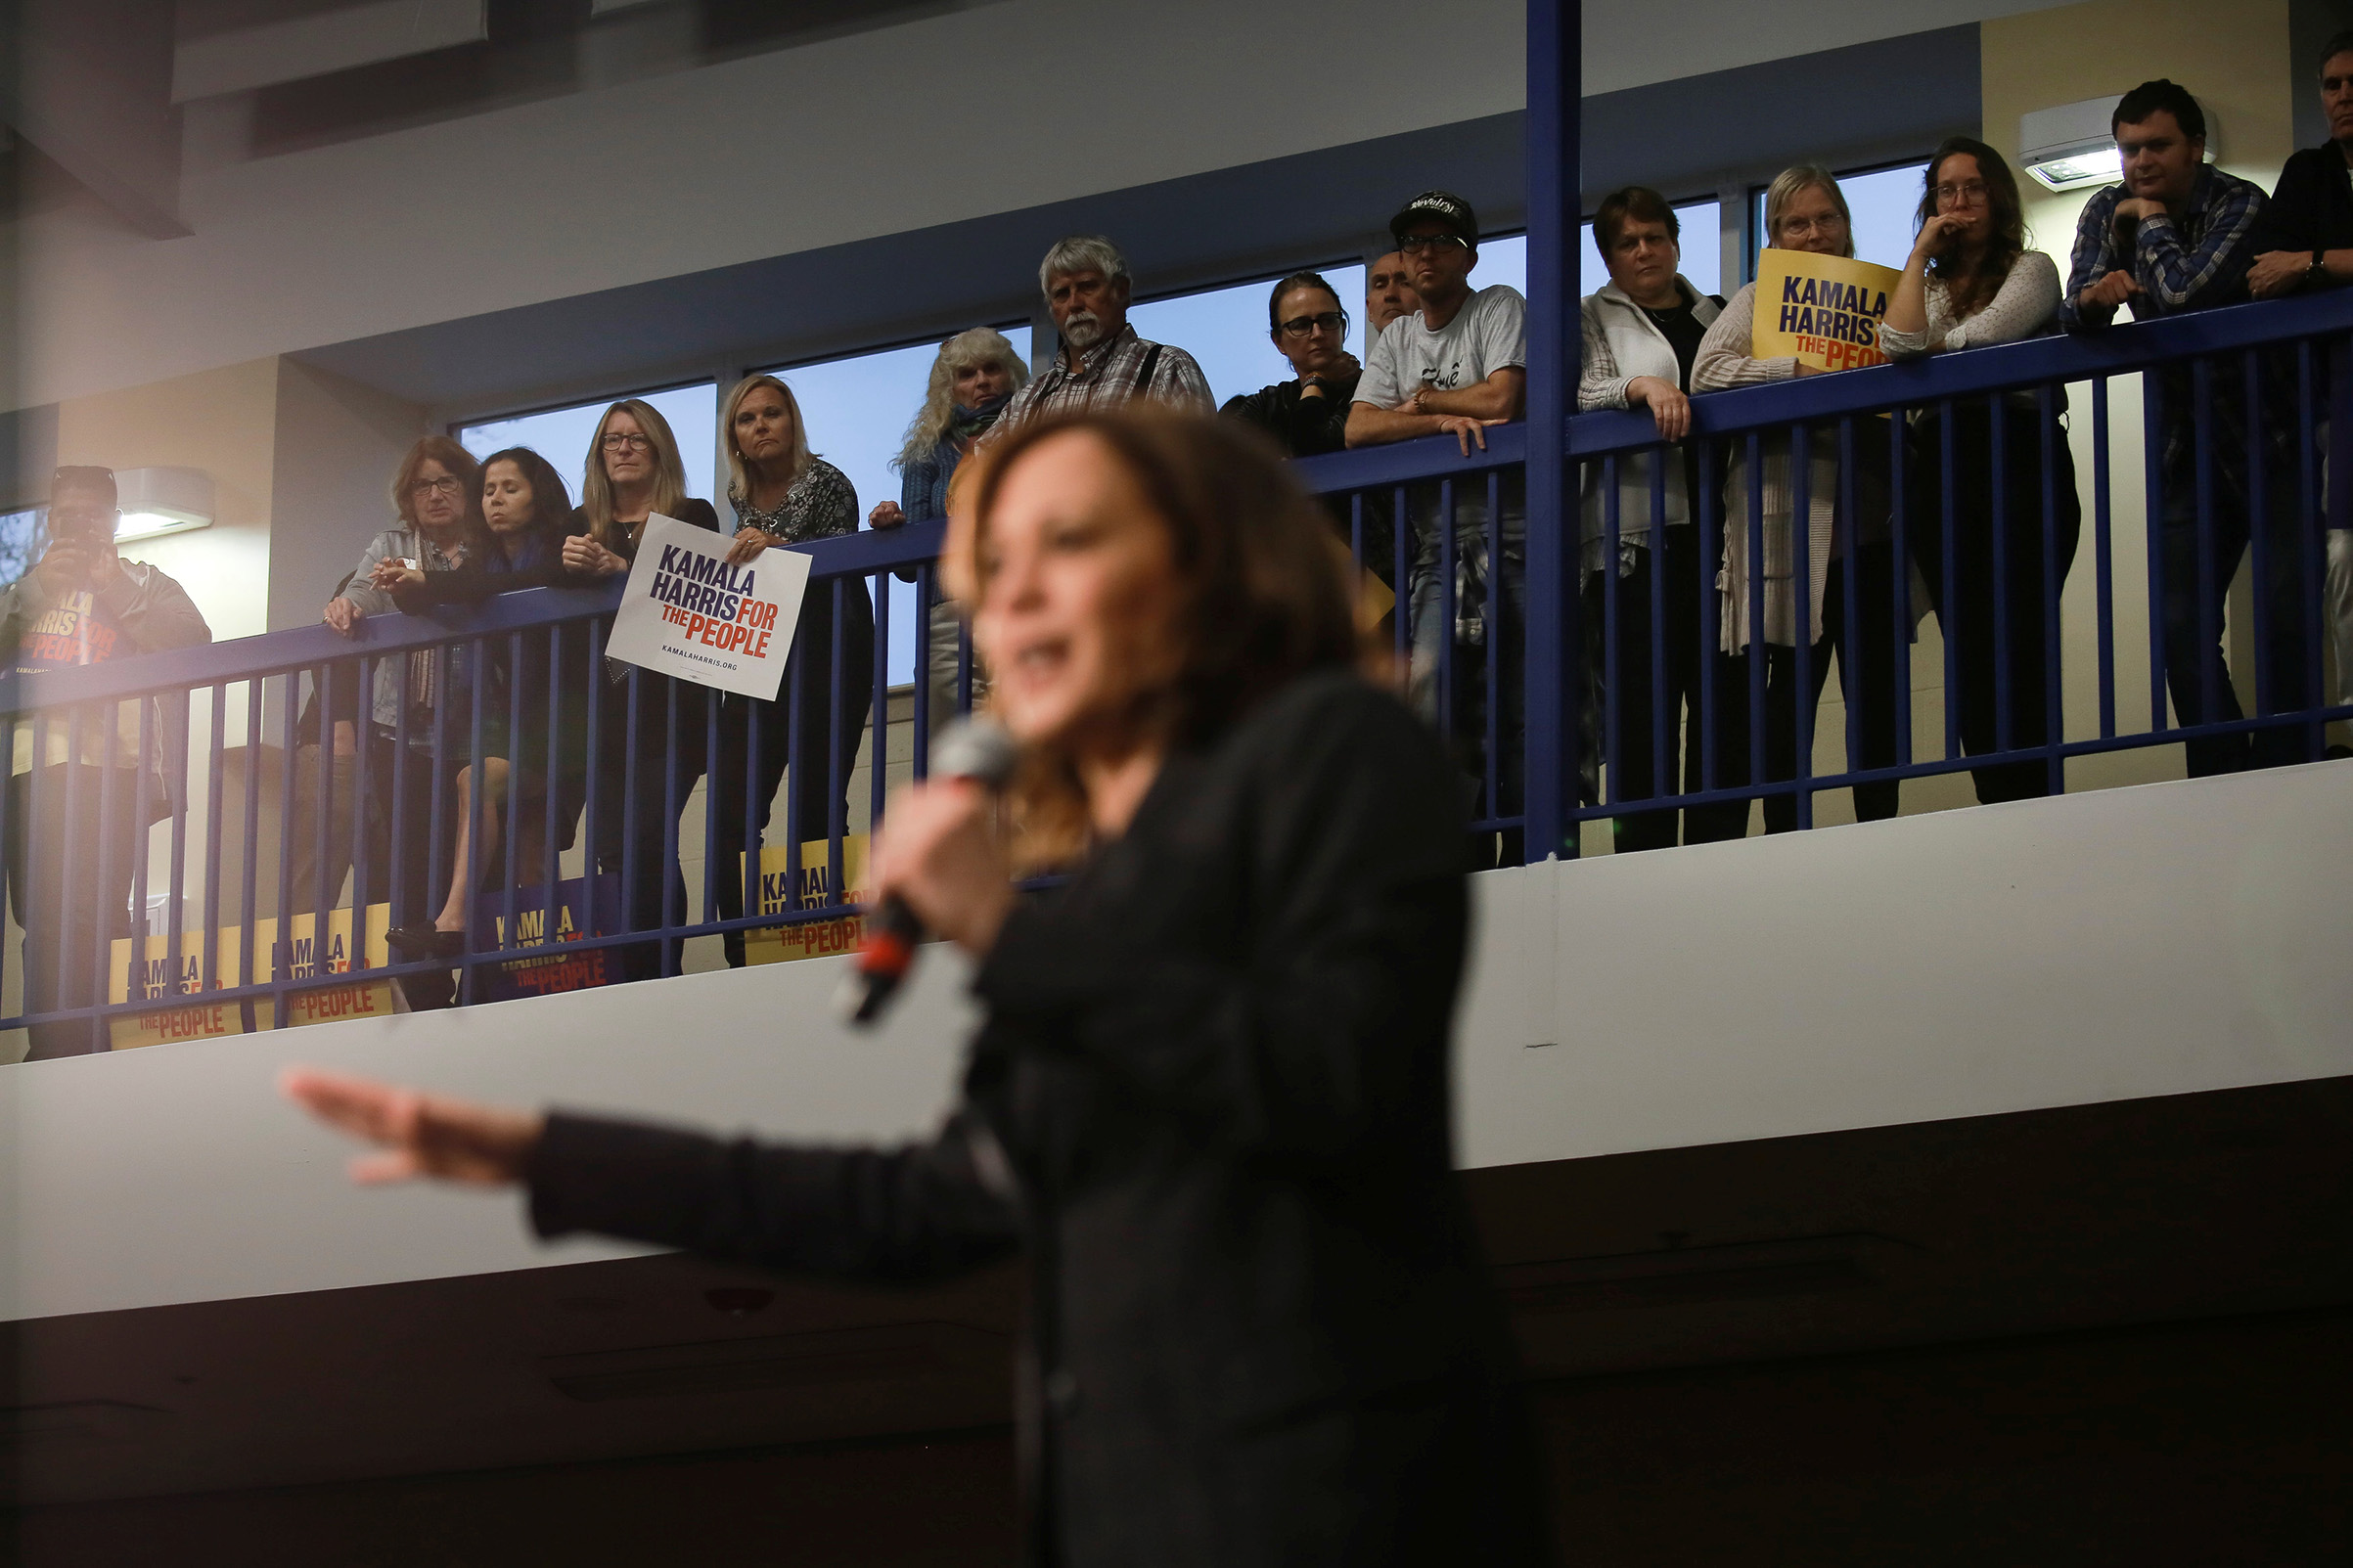 Sen. and Democratic presidential hopeful Kamala Harris campaigns at a town hall in North Charleston, S.C., on Feb. 15, 2019. (Elijah Nouvelage—Reuters)